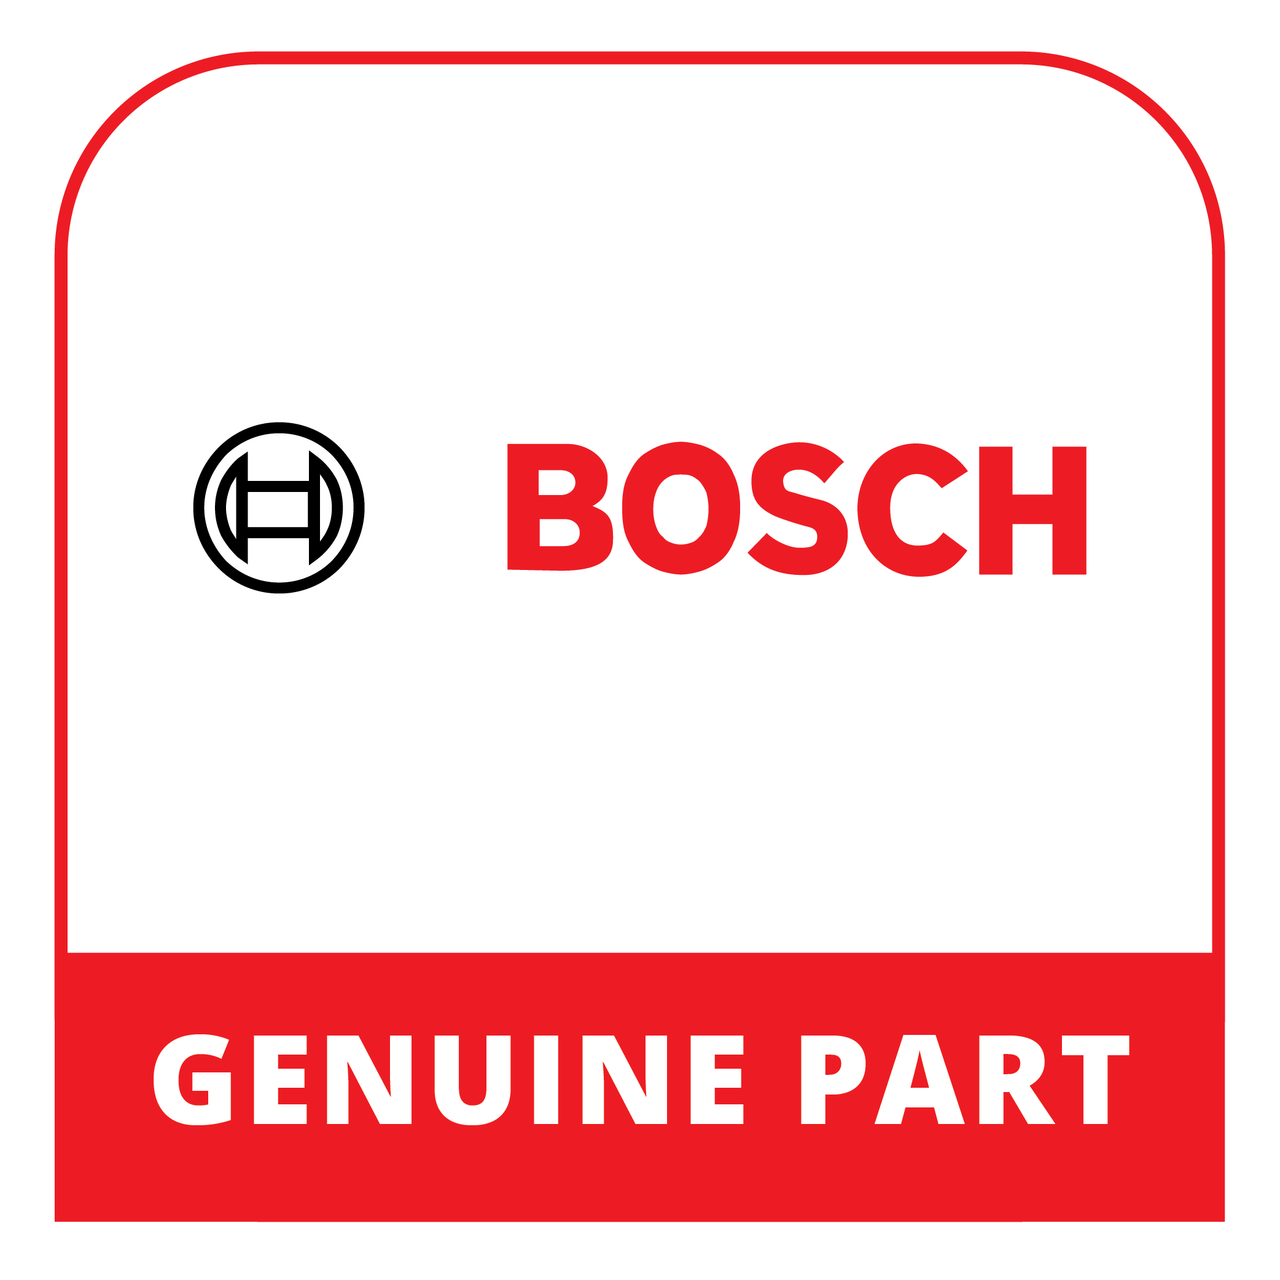 Bosch (Thermador) 10007633 - Cable Harness - Genuine Bosch (Thermador) Part